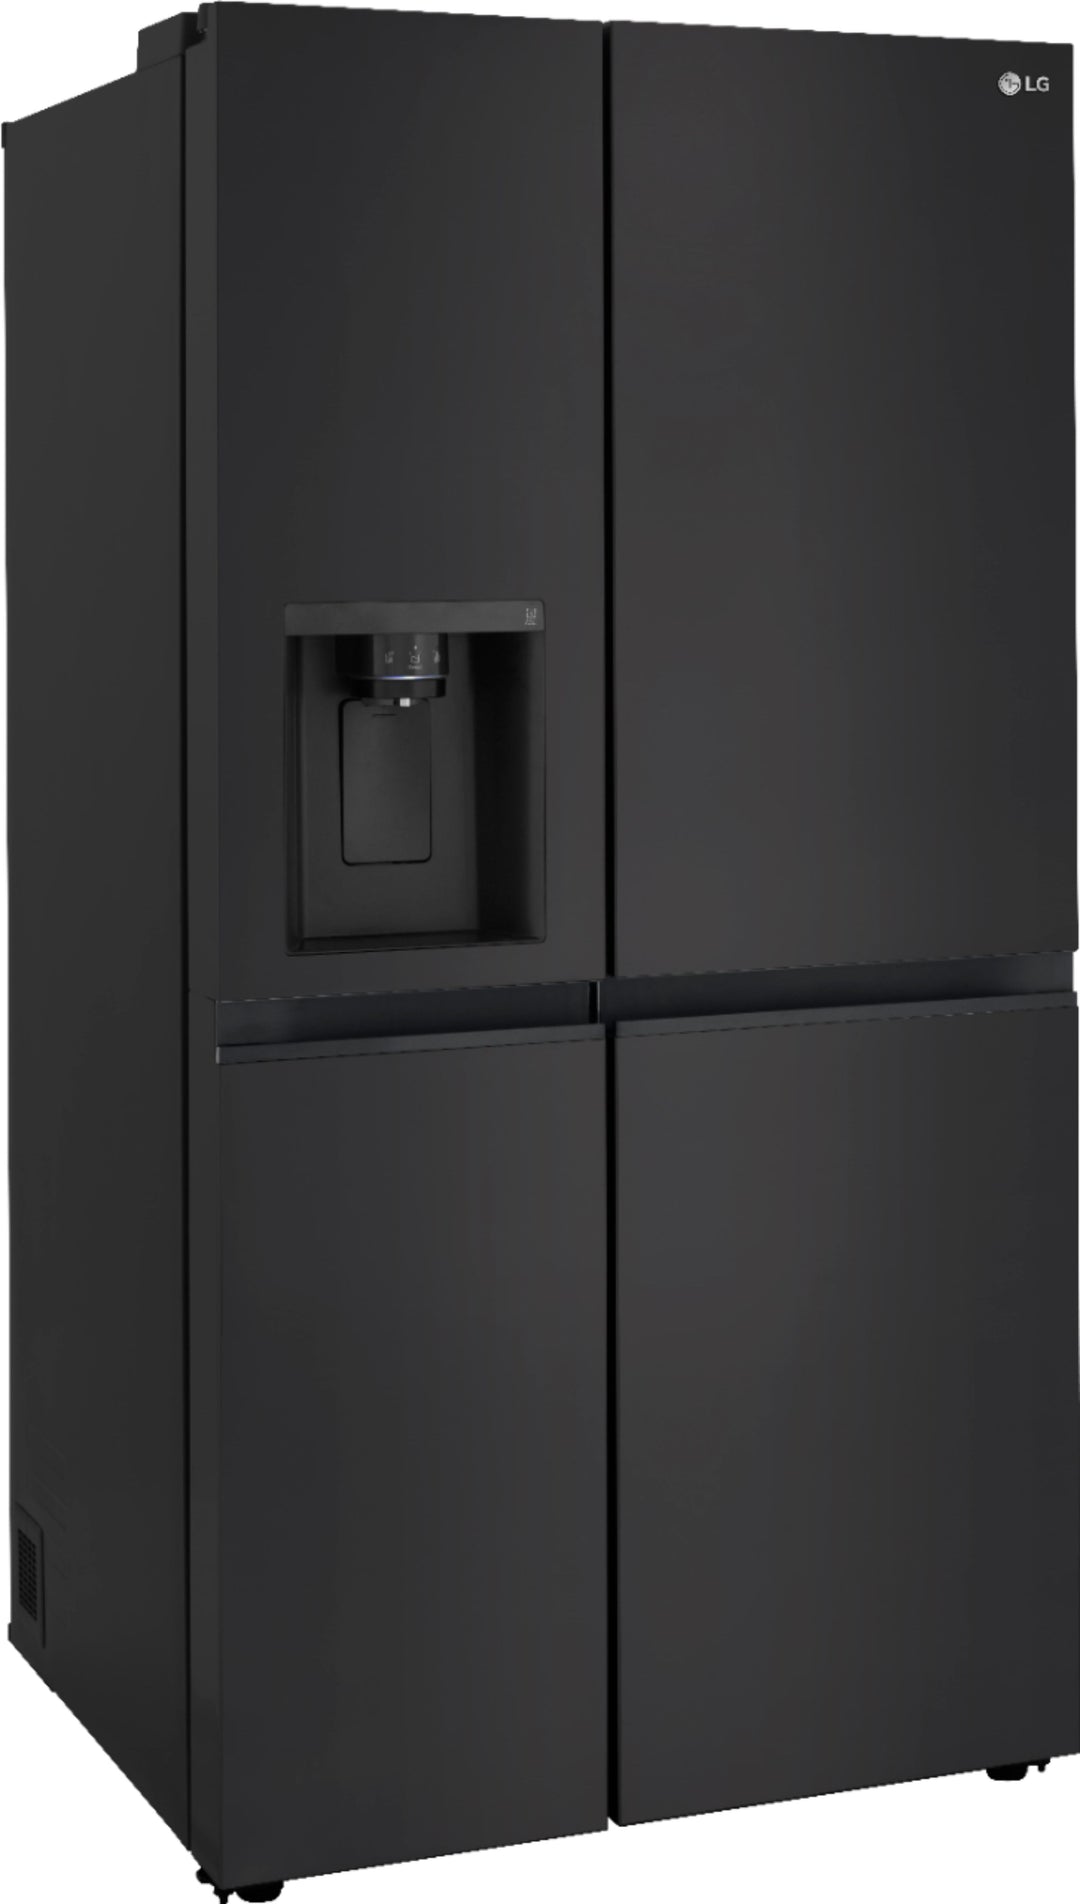 LG - 27.2 cu ft Side by Side Refrigerator with SpacePlus Ice - Smooth black_9